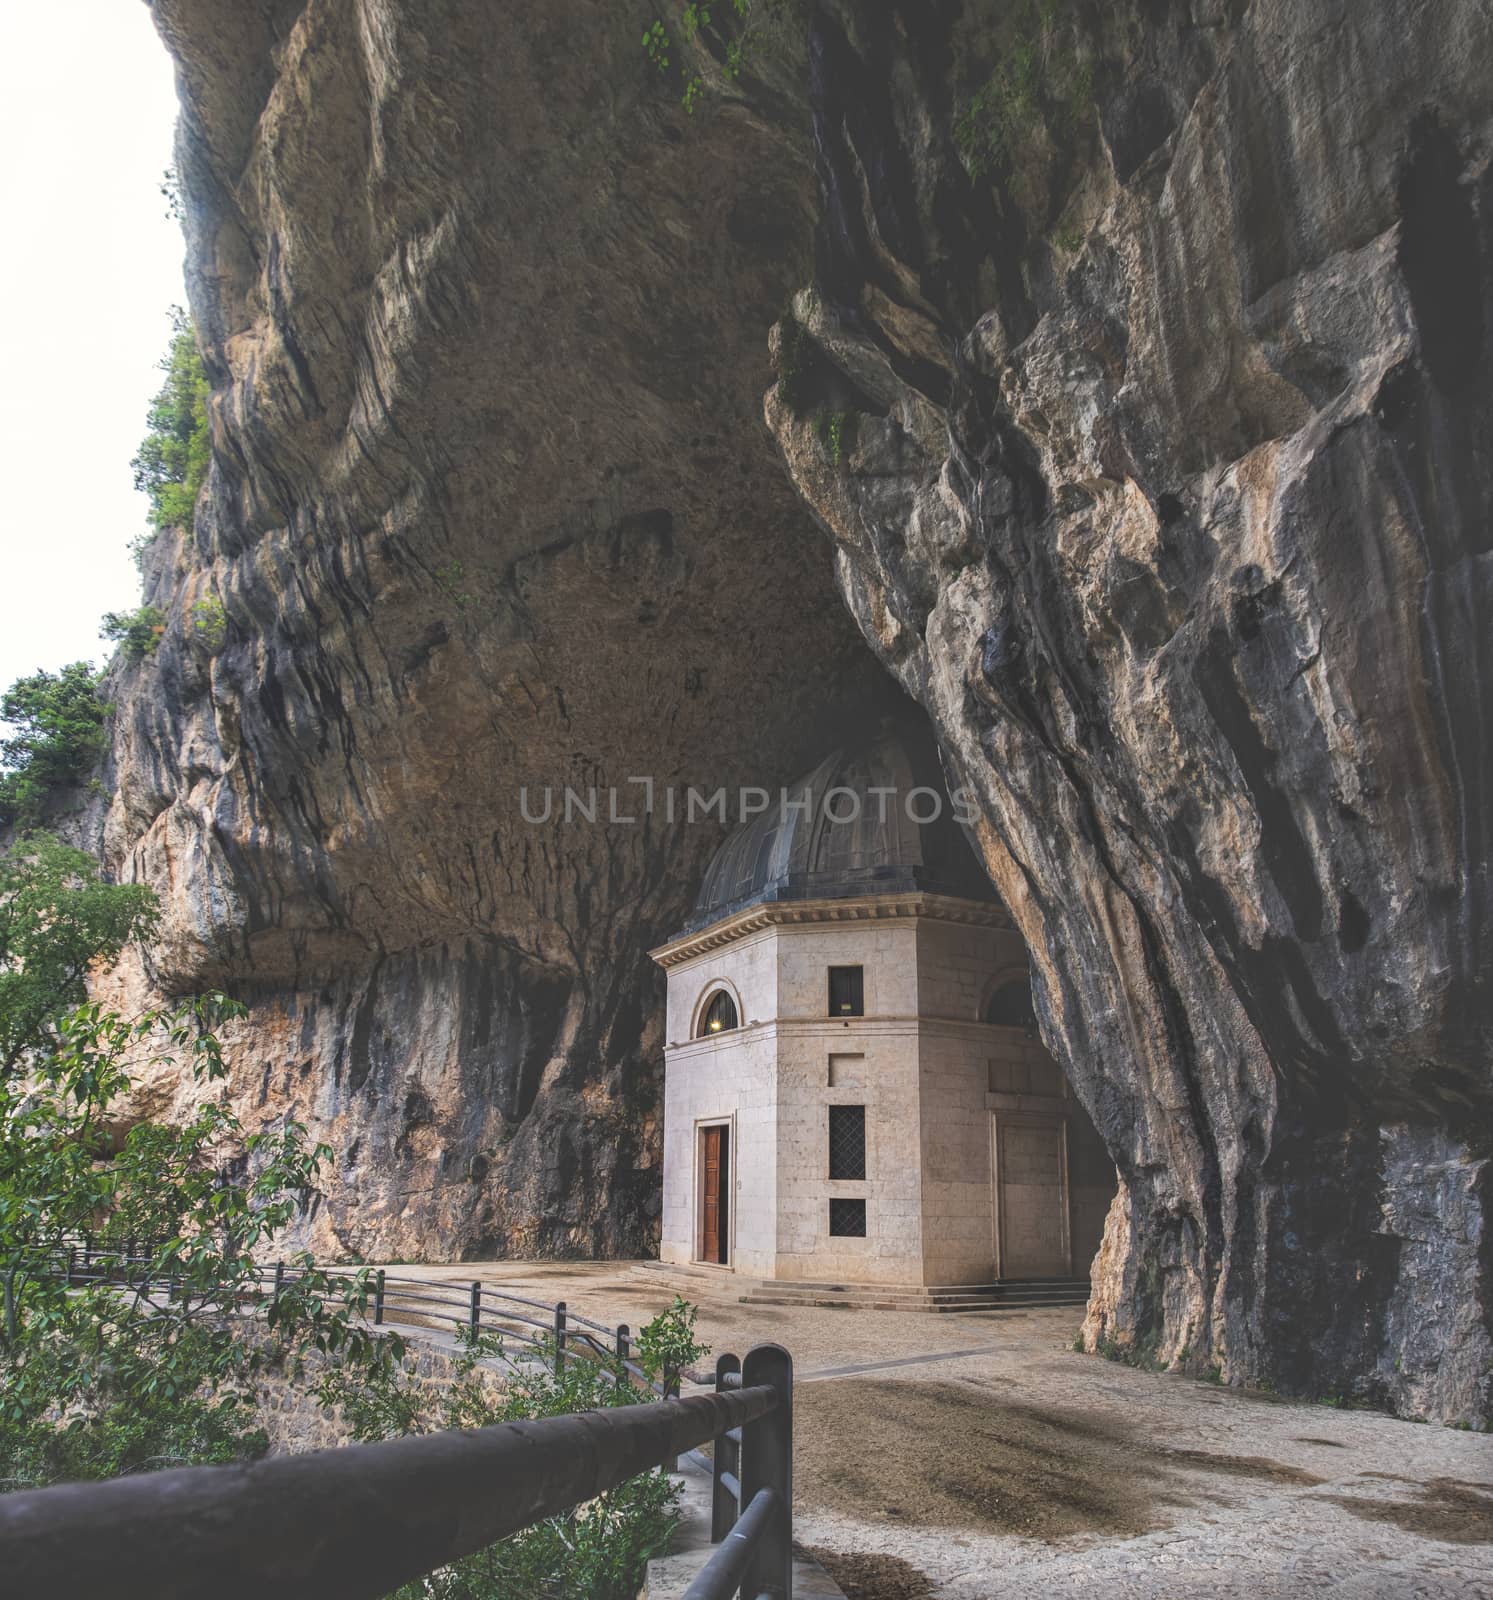 church inside cave - Italy - Marche - Valadier temple church near Frasassi caves in Genga Ancona .